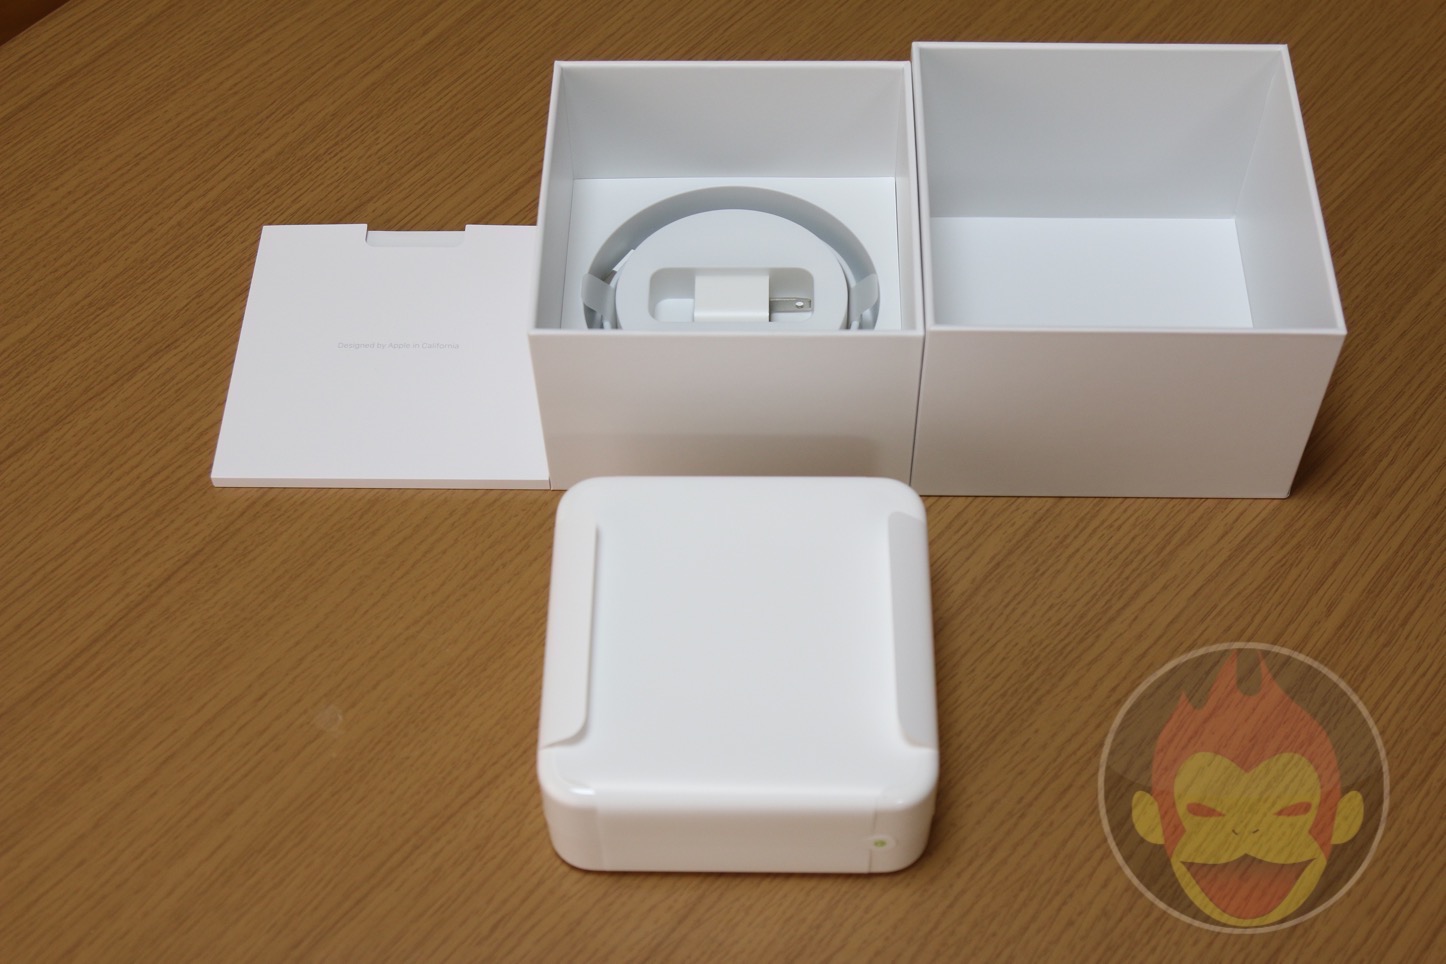 Apple-Watch-Stainless-Steel-White-Band-42mm-006.JPG